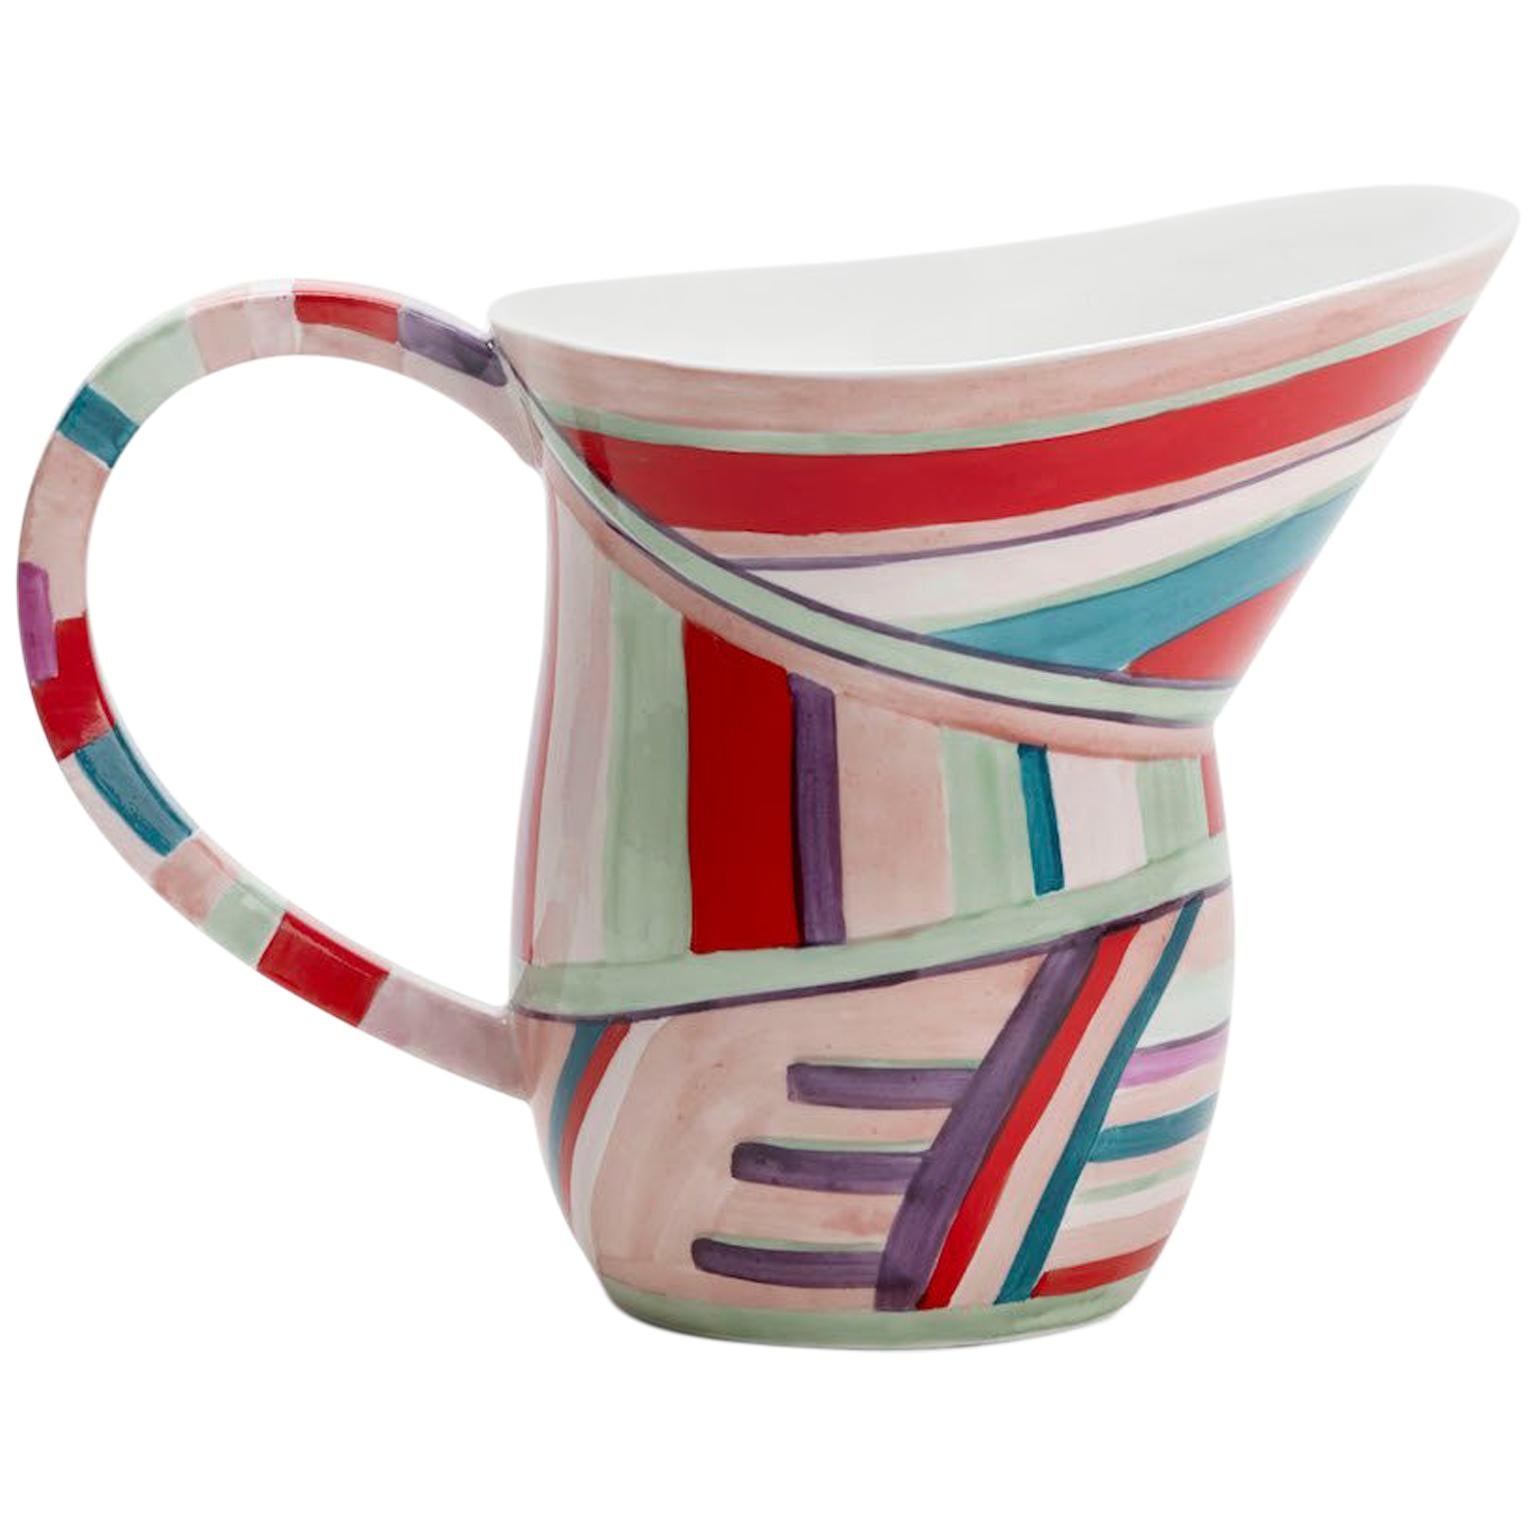 Hand-Painted Ceramic Festival Jug with Exaggerated Curves and Colored Stripes For Sale